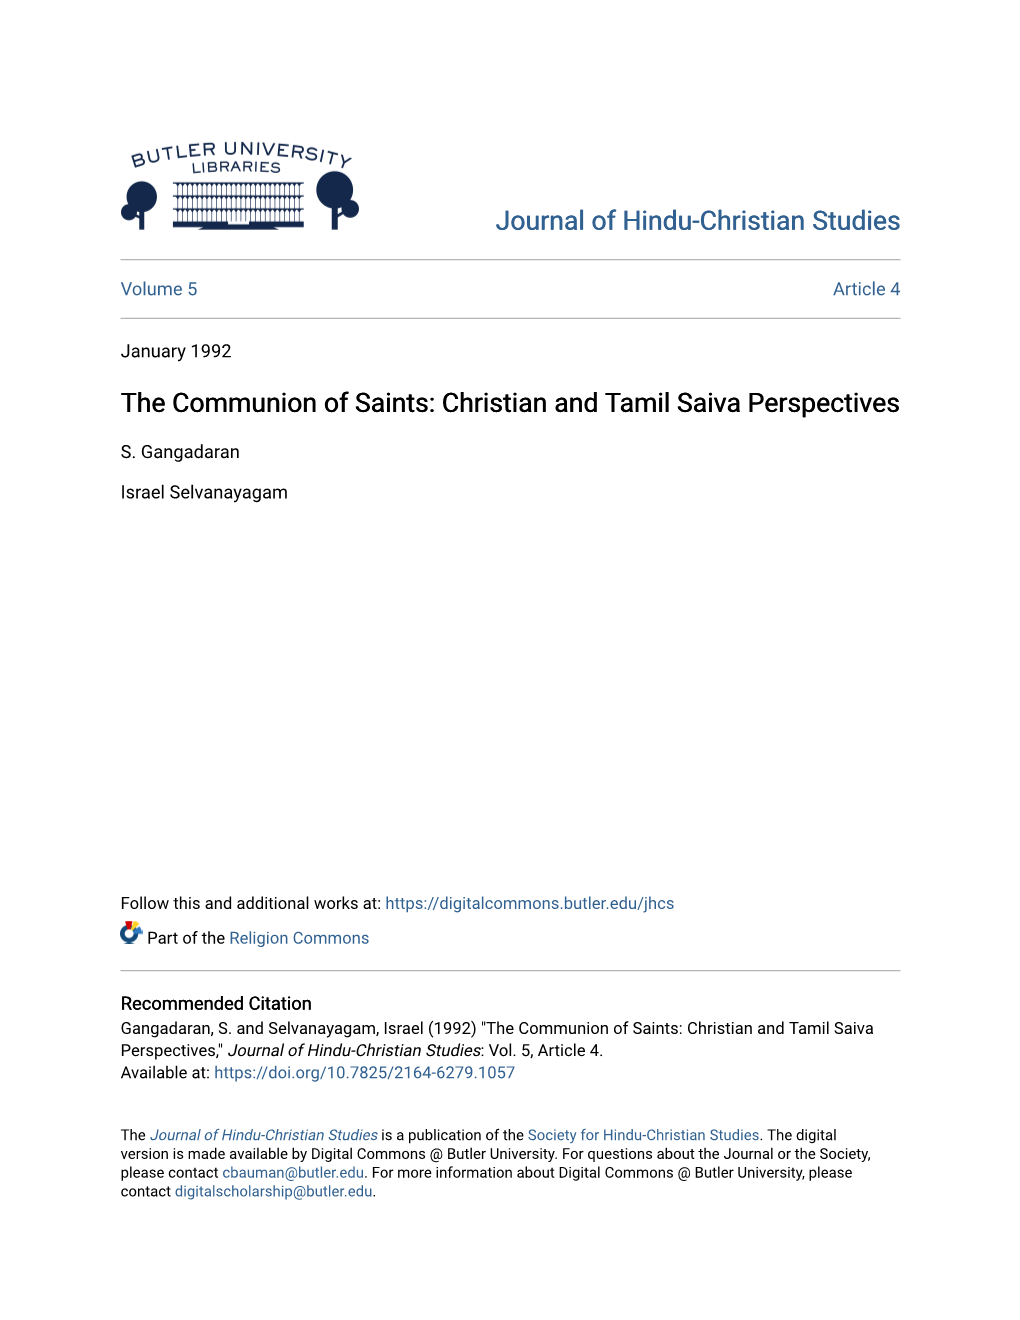 The Communion of Saints: Christian and Tamil Saiva Perspectives